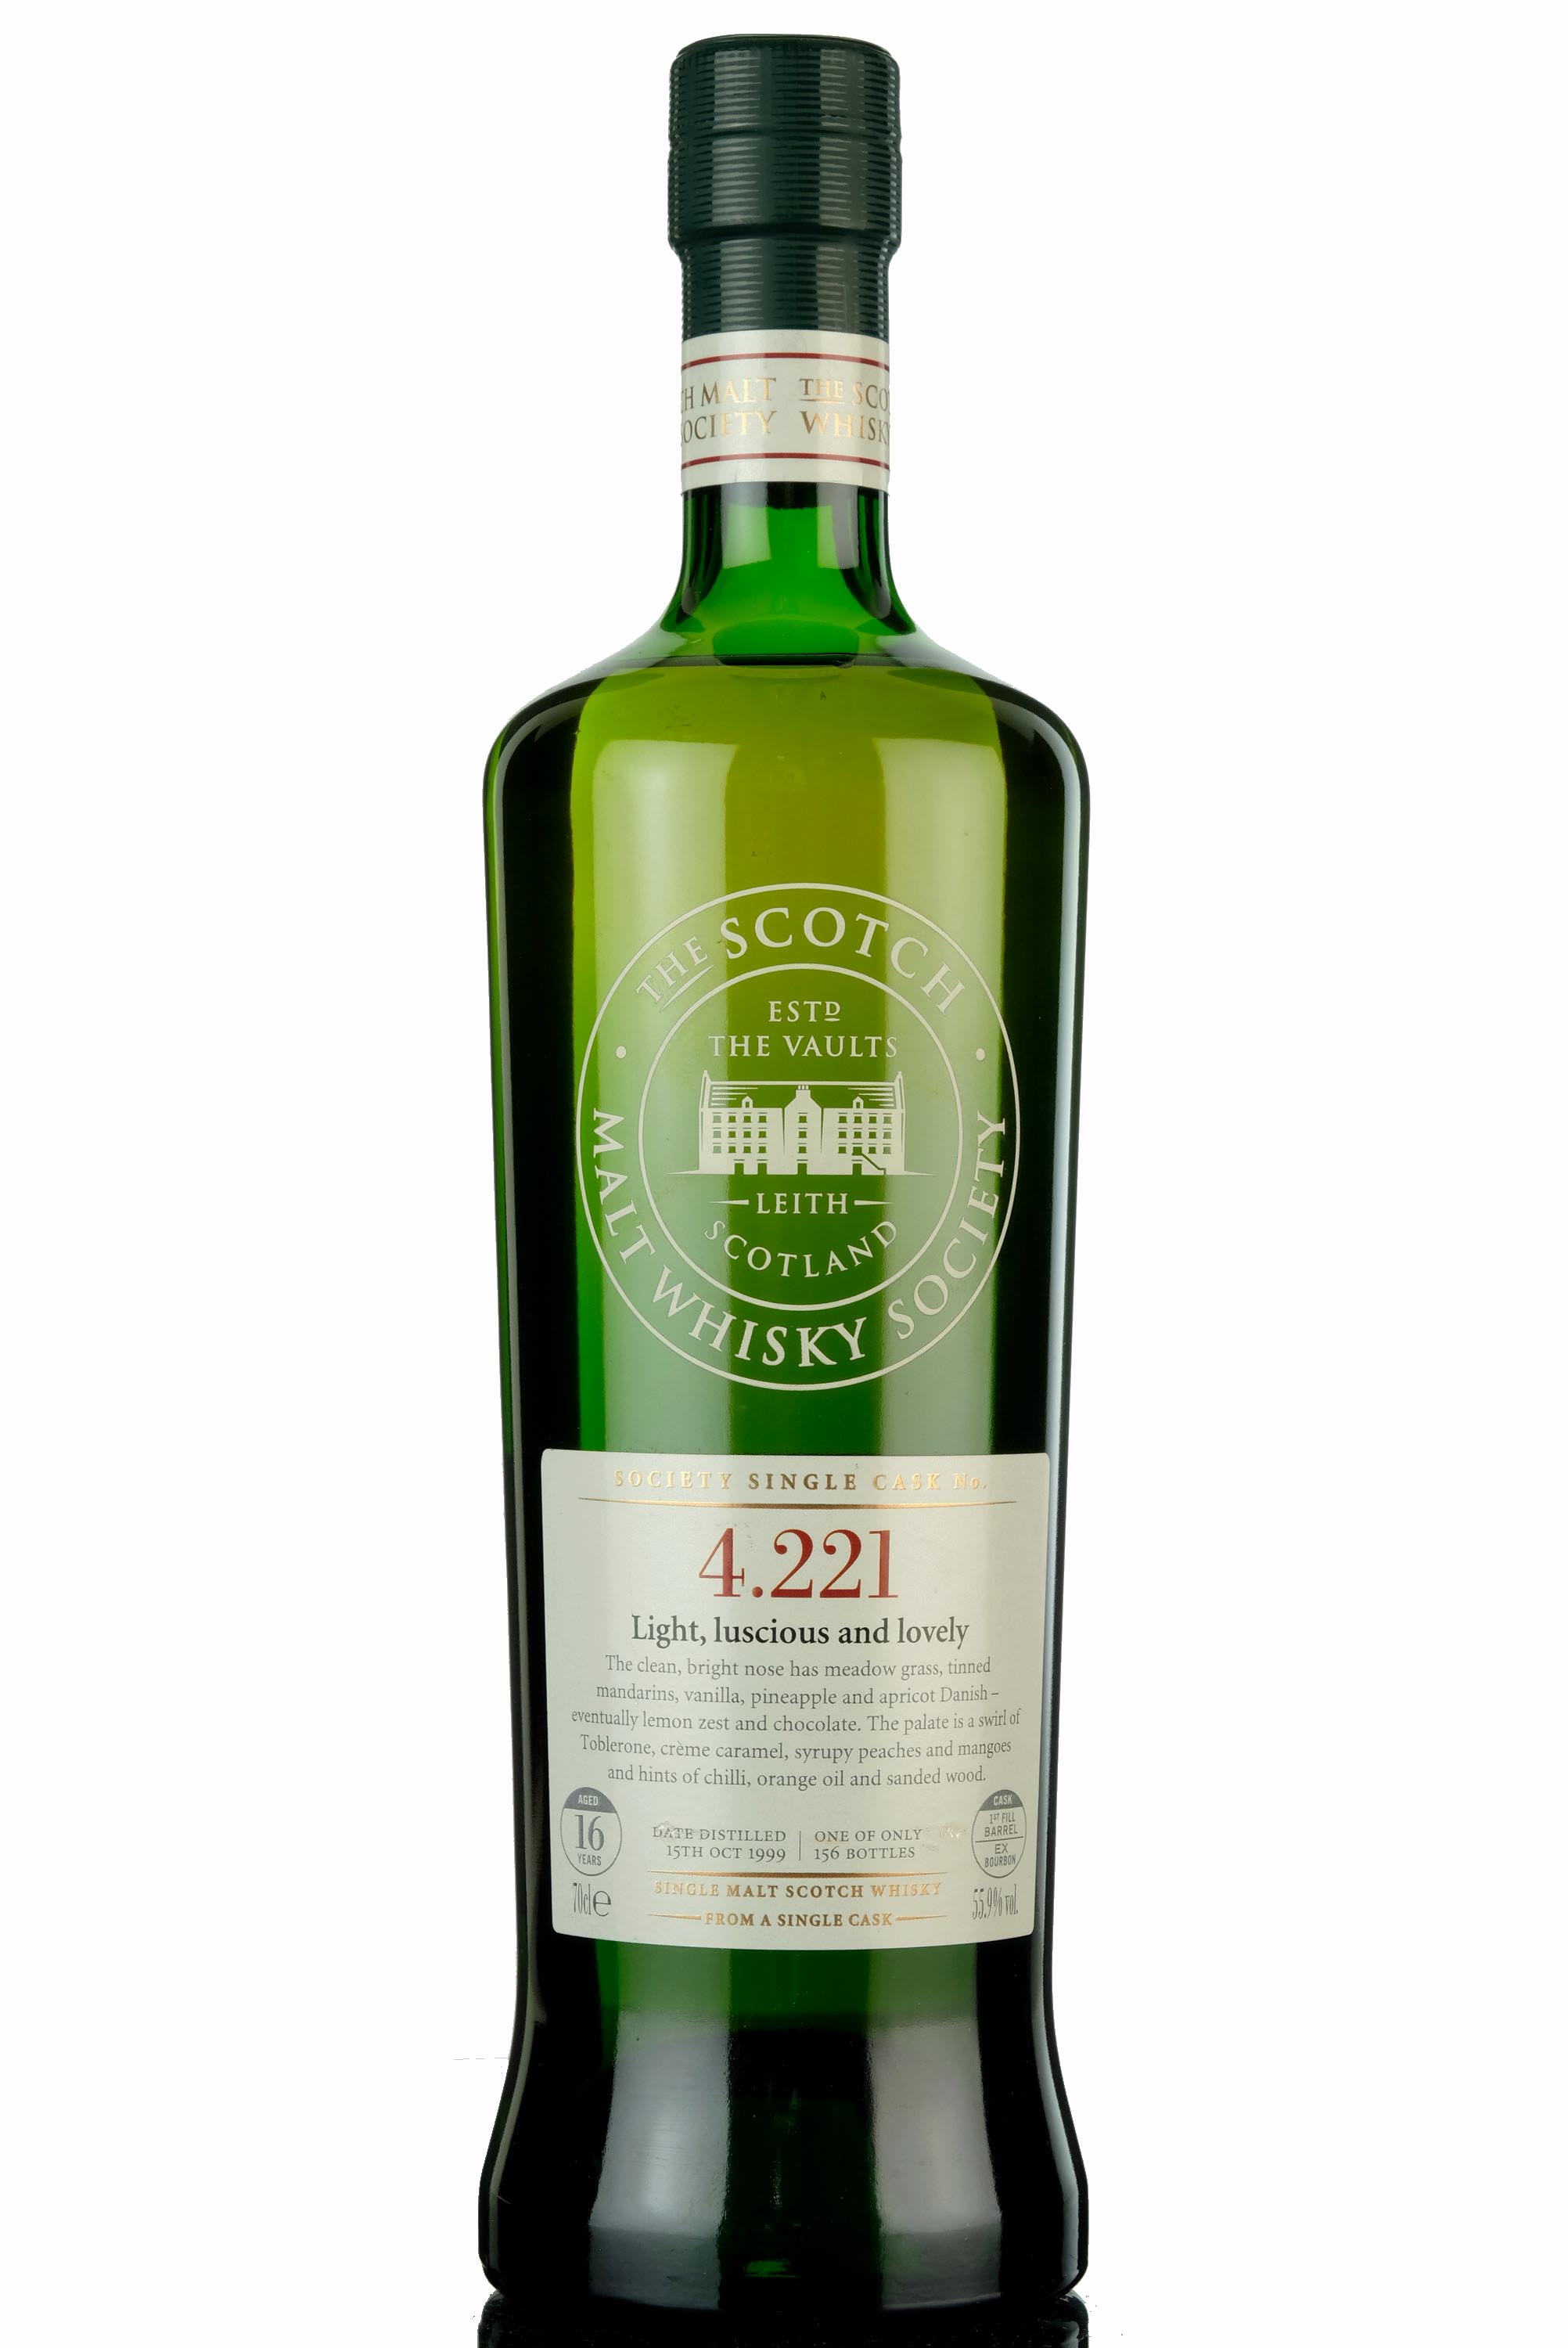 Highland Park 1999 - 16 Year Old - SMWS 4.221